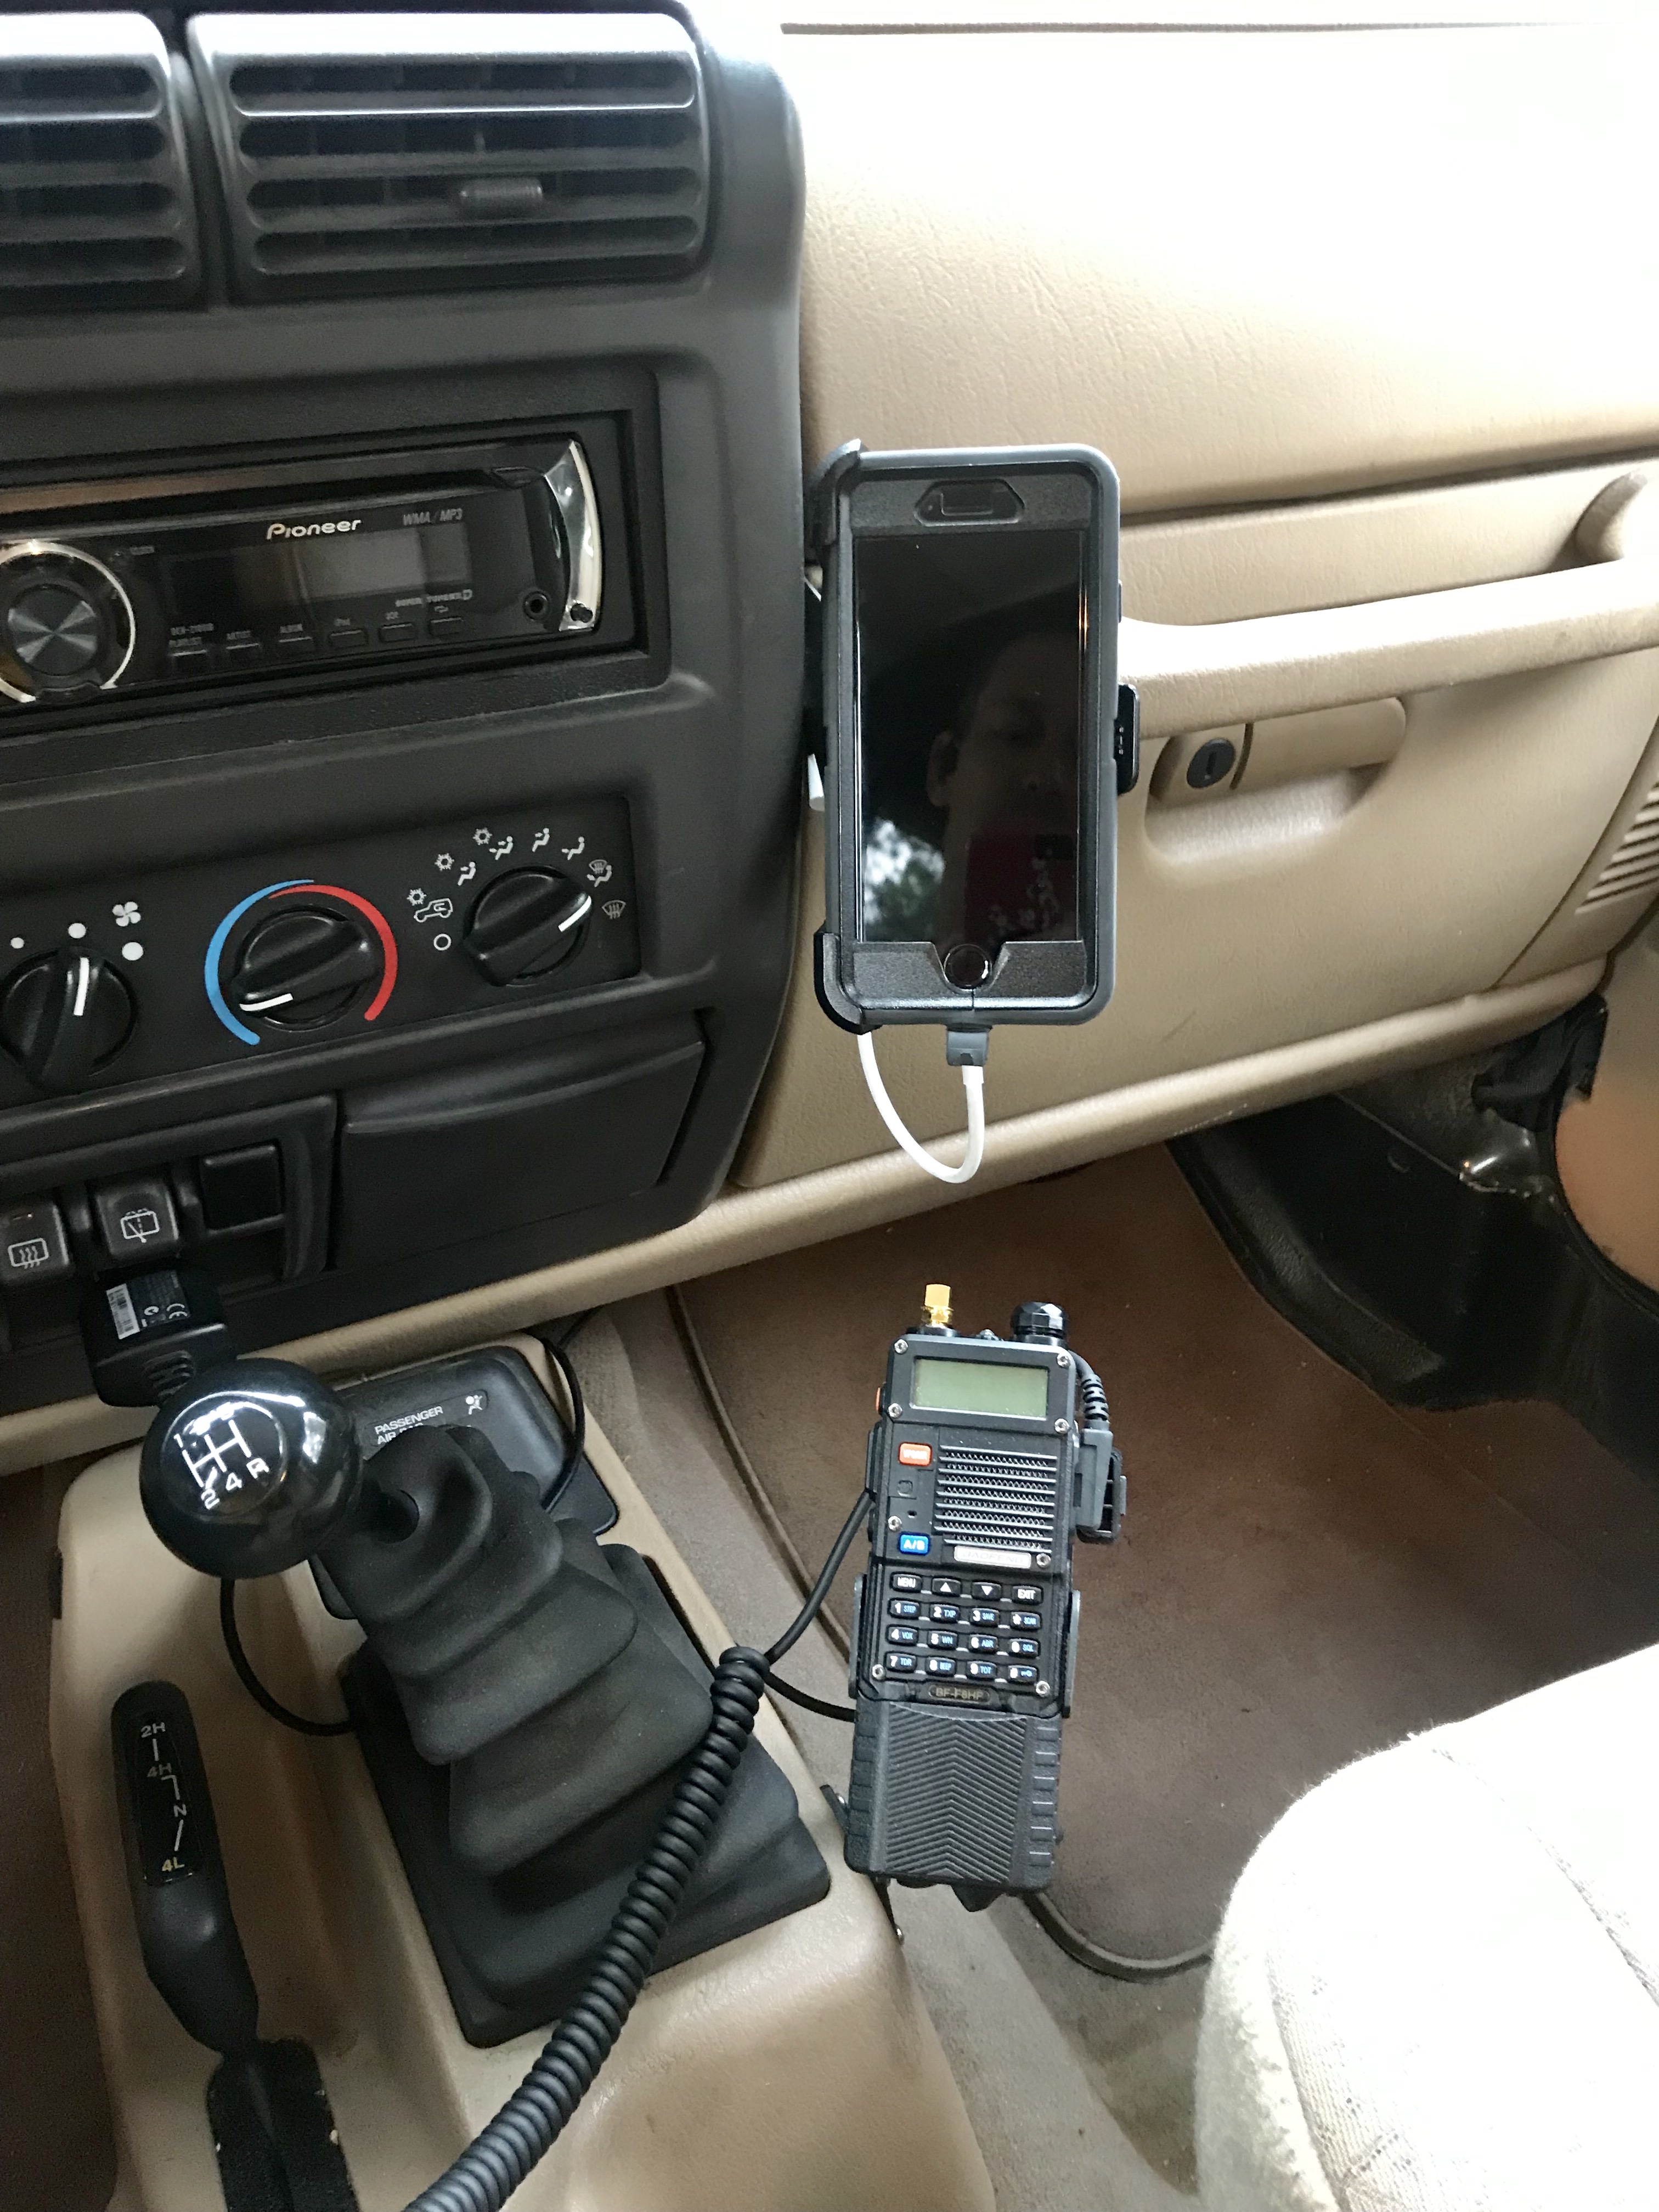 How I Mounted a Baofeng Radio in my Jeep Wrangler (2002 TJ)